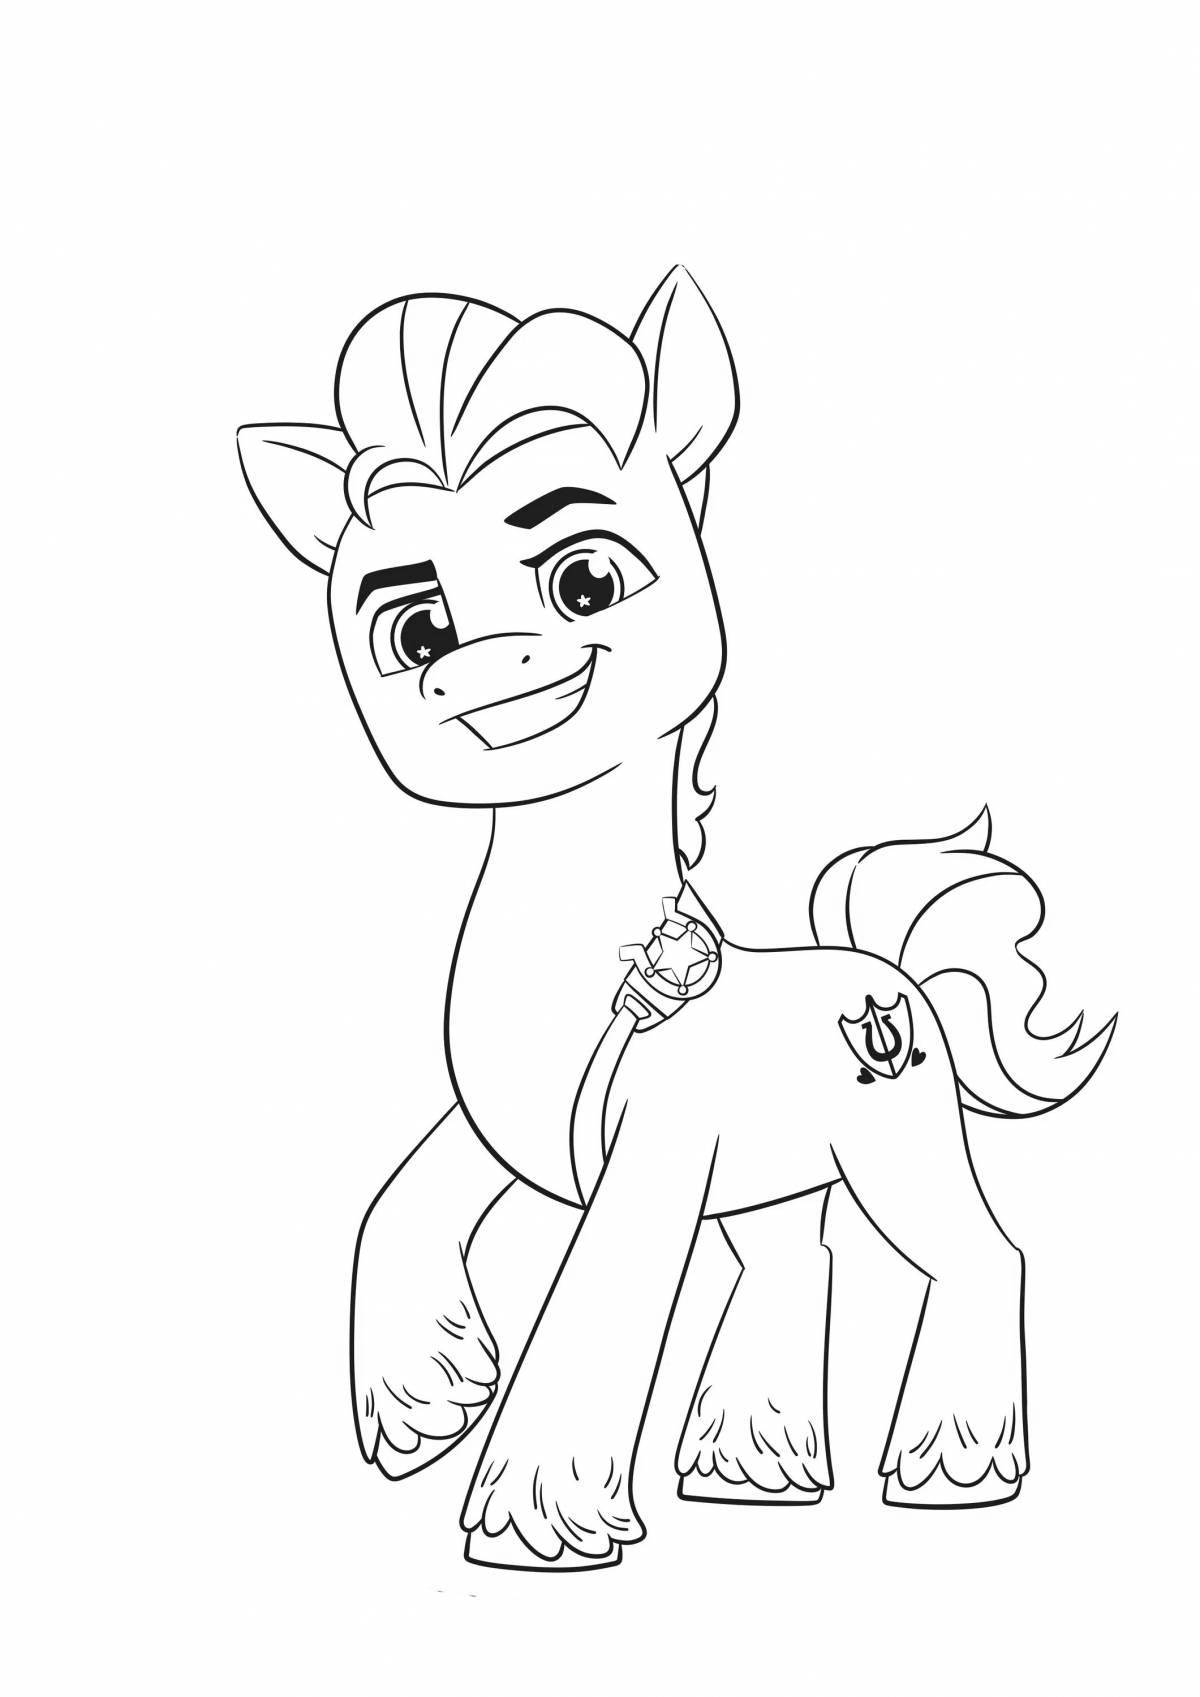 New pony coloring page